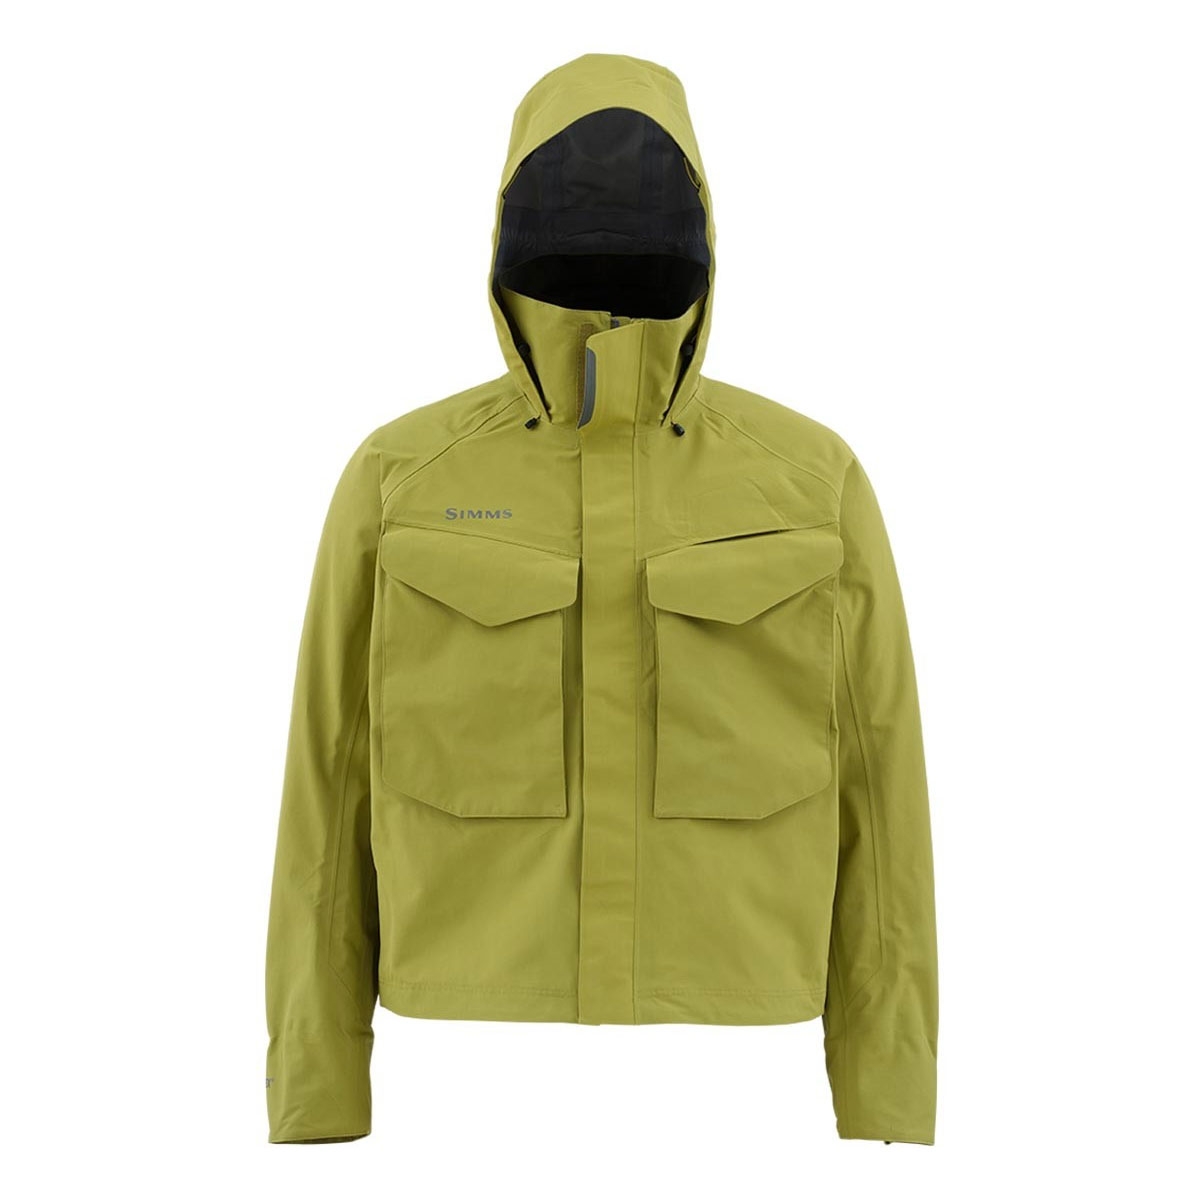 Simms GuideJacket Army green